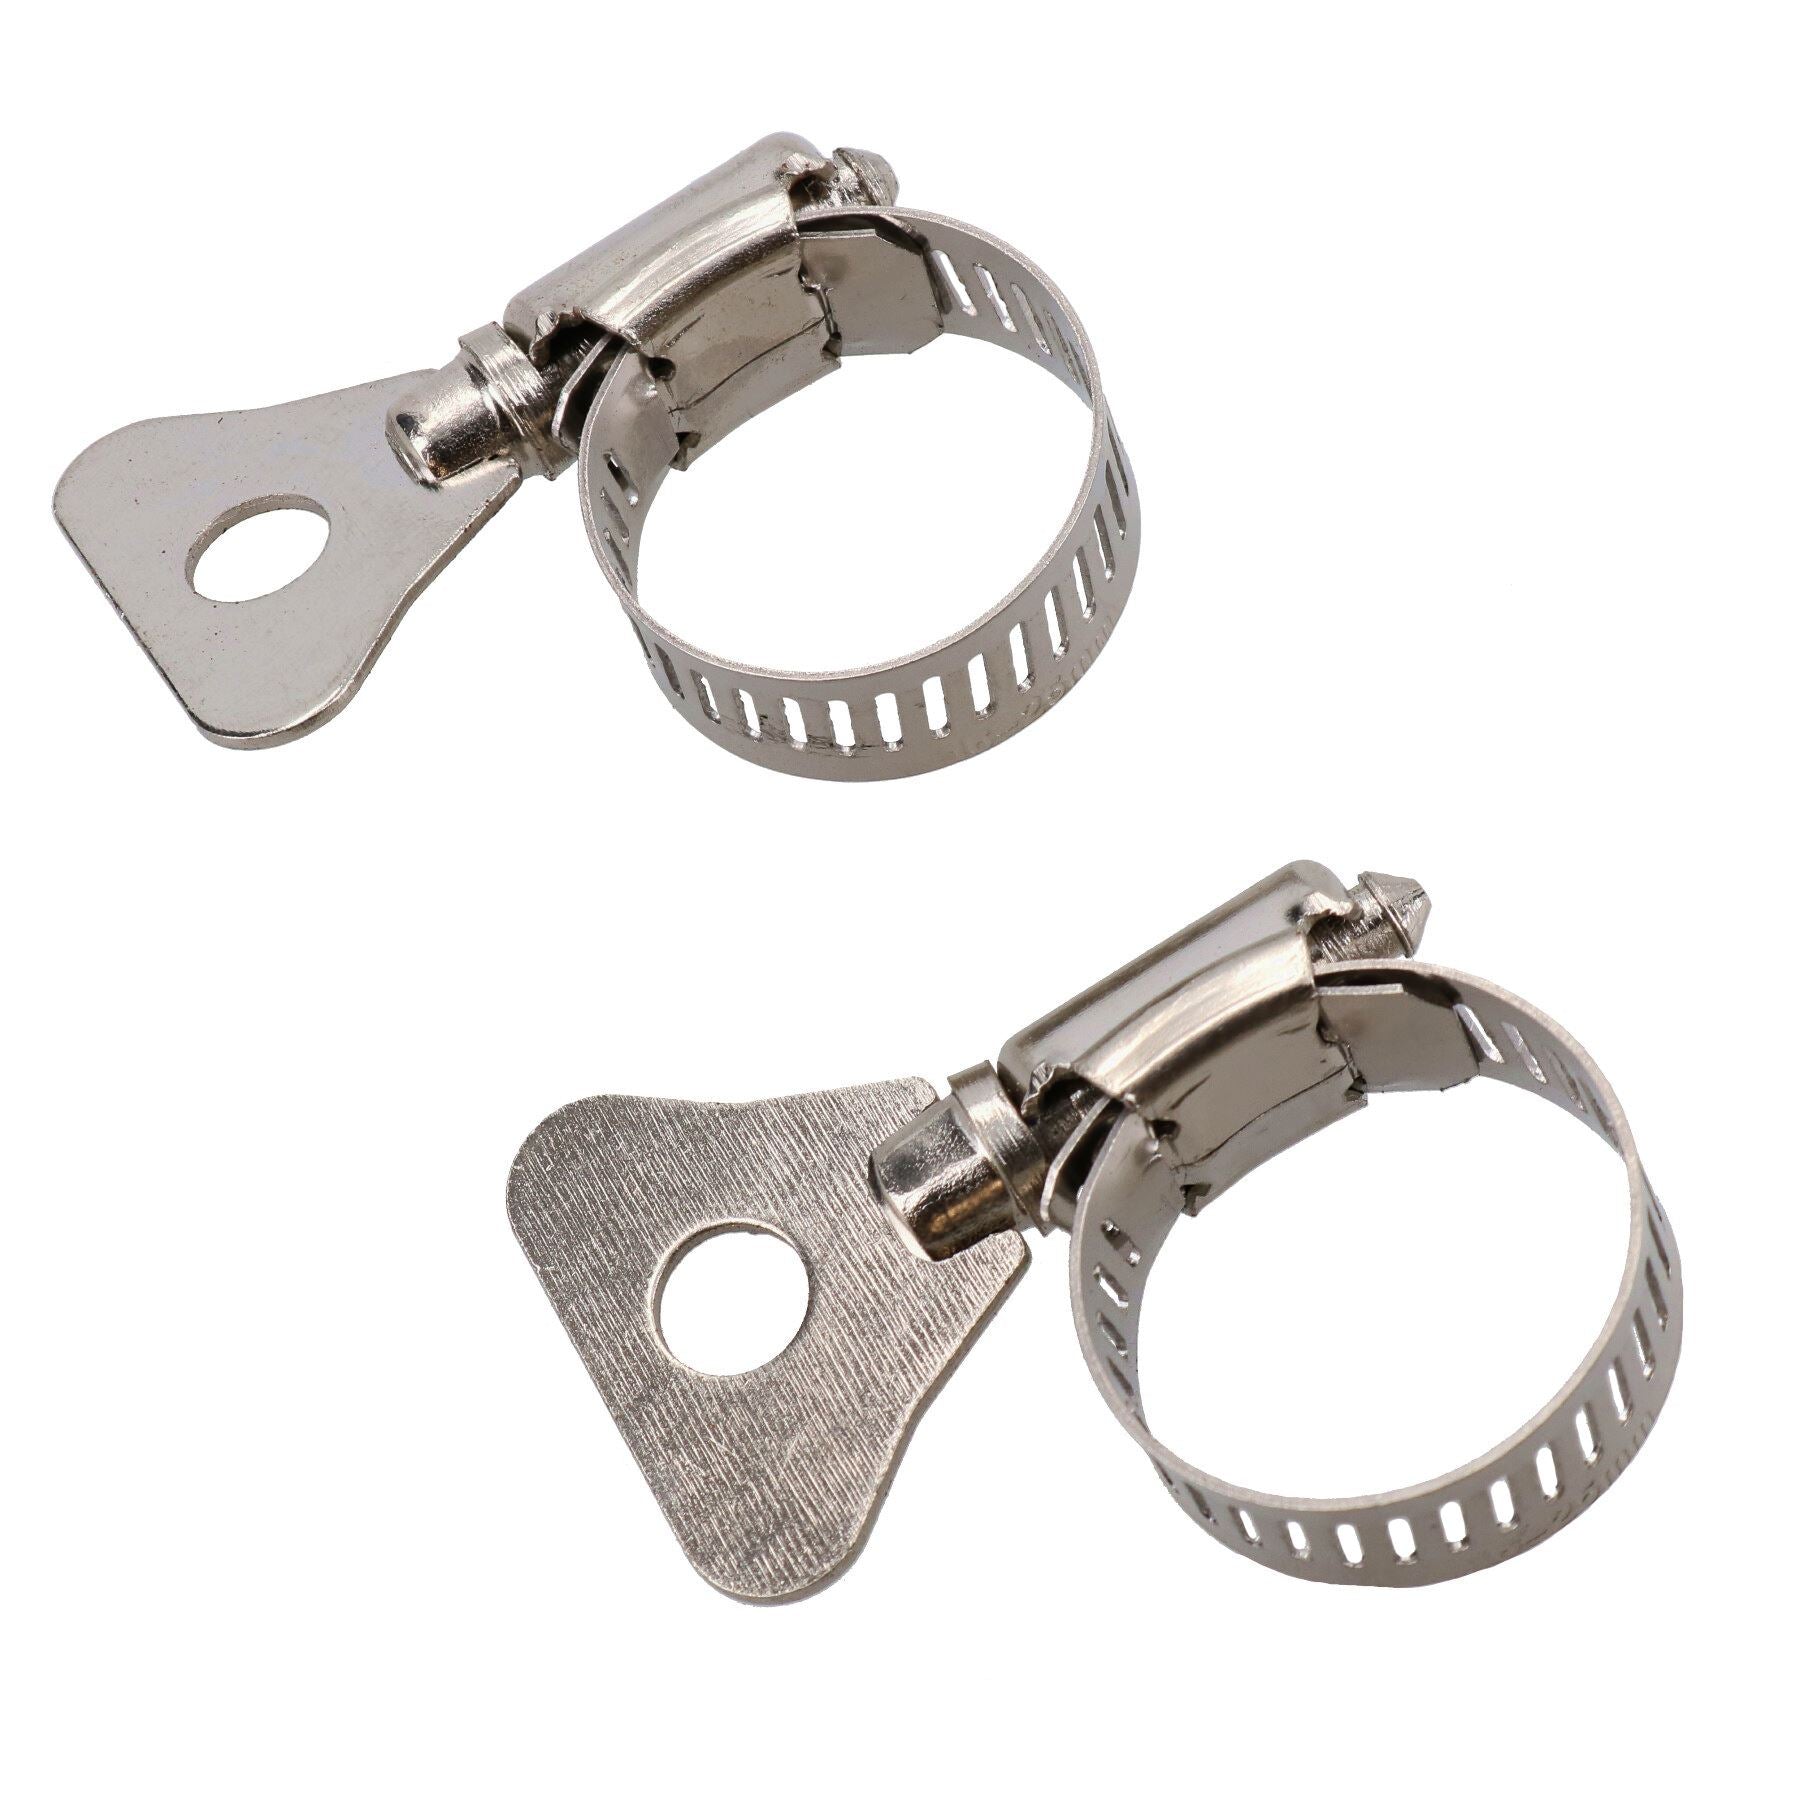 2Pk 16-25mm Stainless Steel Pond Hose Wing Clamps Securing Pond Hose